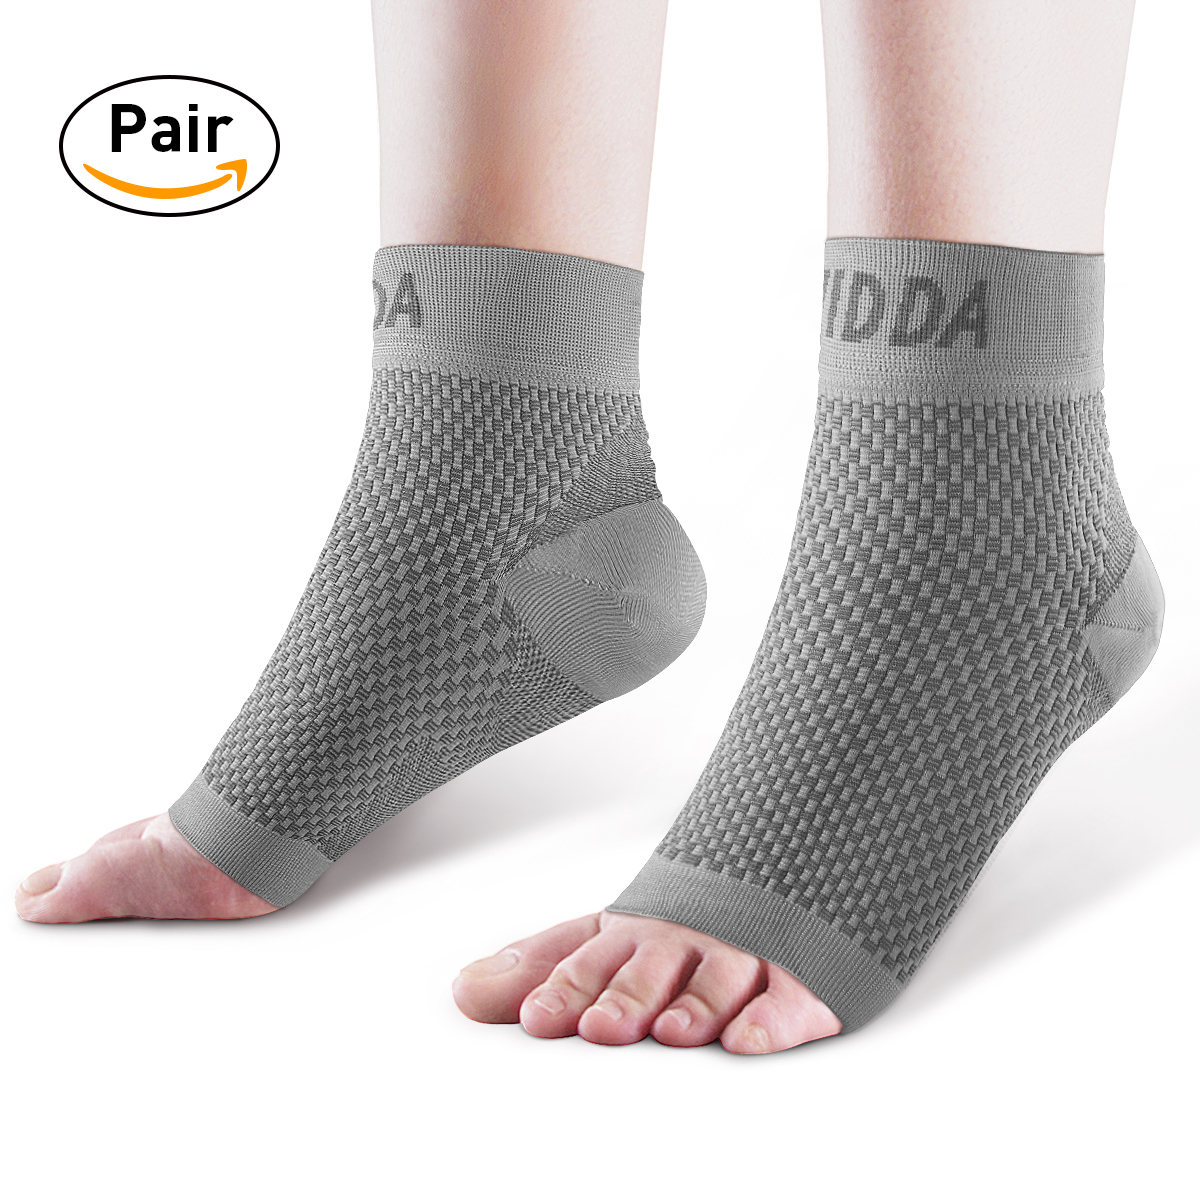 Ankle Brace for Men Women Pair AVIDDA Plantar Fasciitis Socks with Arch Support Compression Ankle Support Foot Sleeve for Achilles Tendon Support Swelling Eases Heel Pain Relief Gray Small